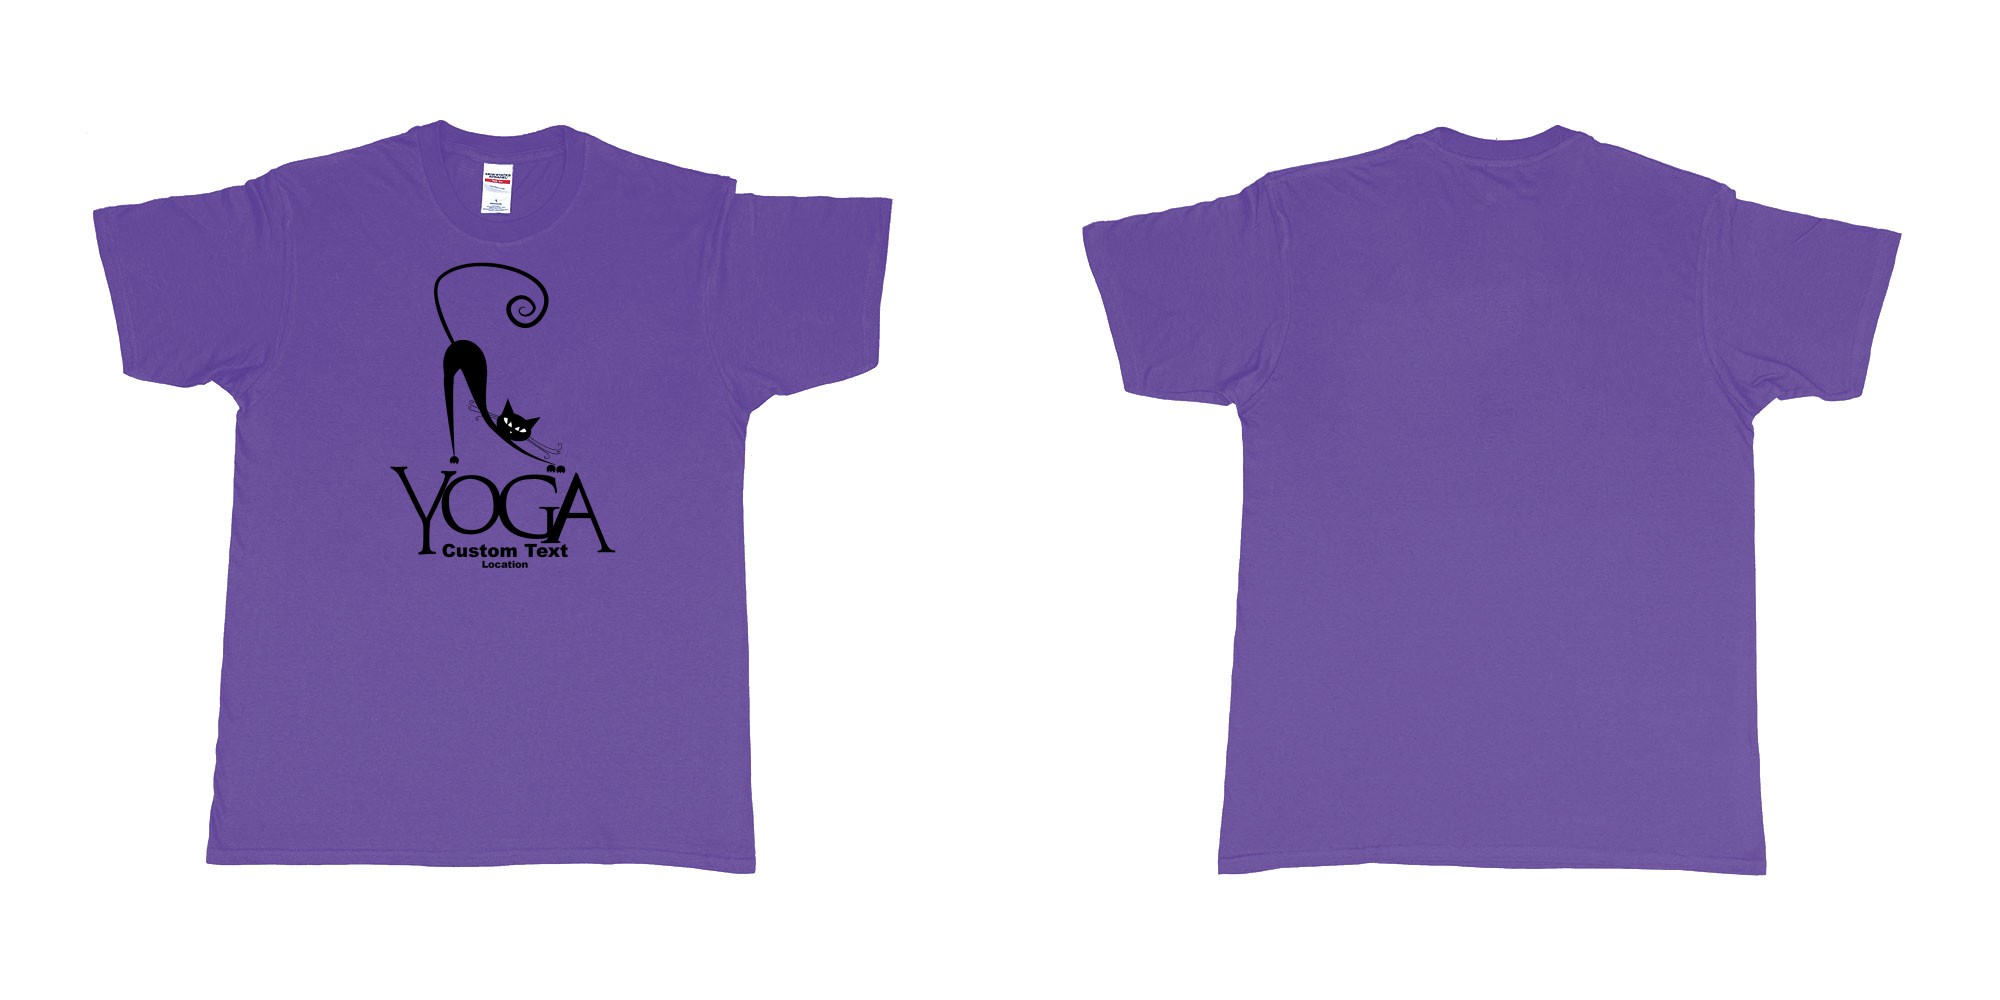 Custom tshirt design cat yoga custom text location print in fabric color purple choice your own text made in Bali by The Pirate Way